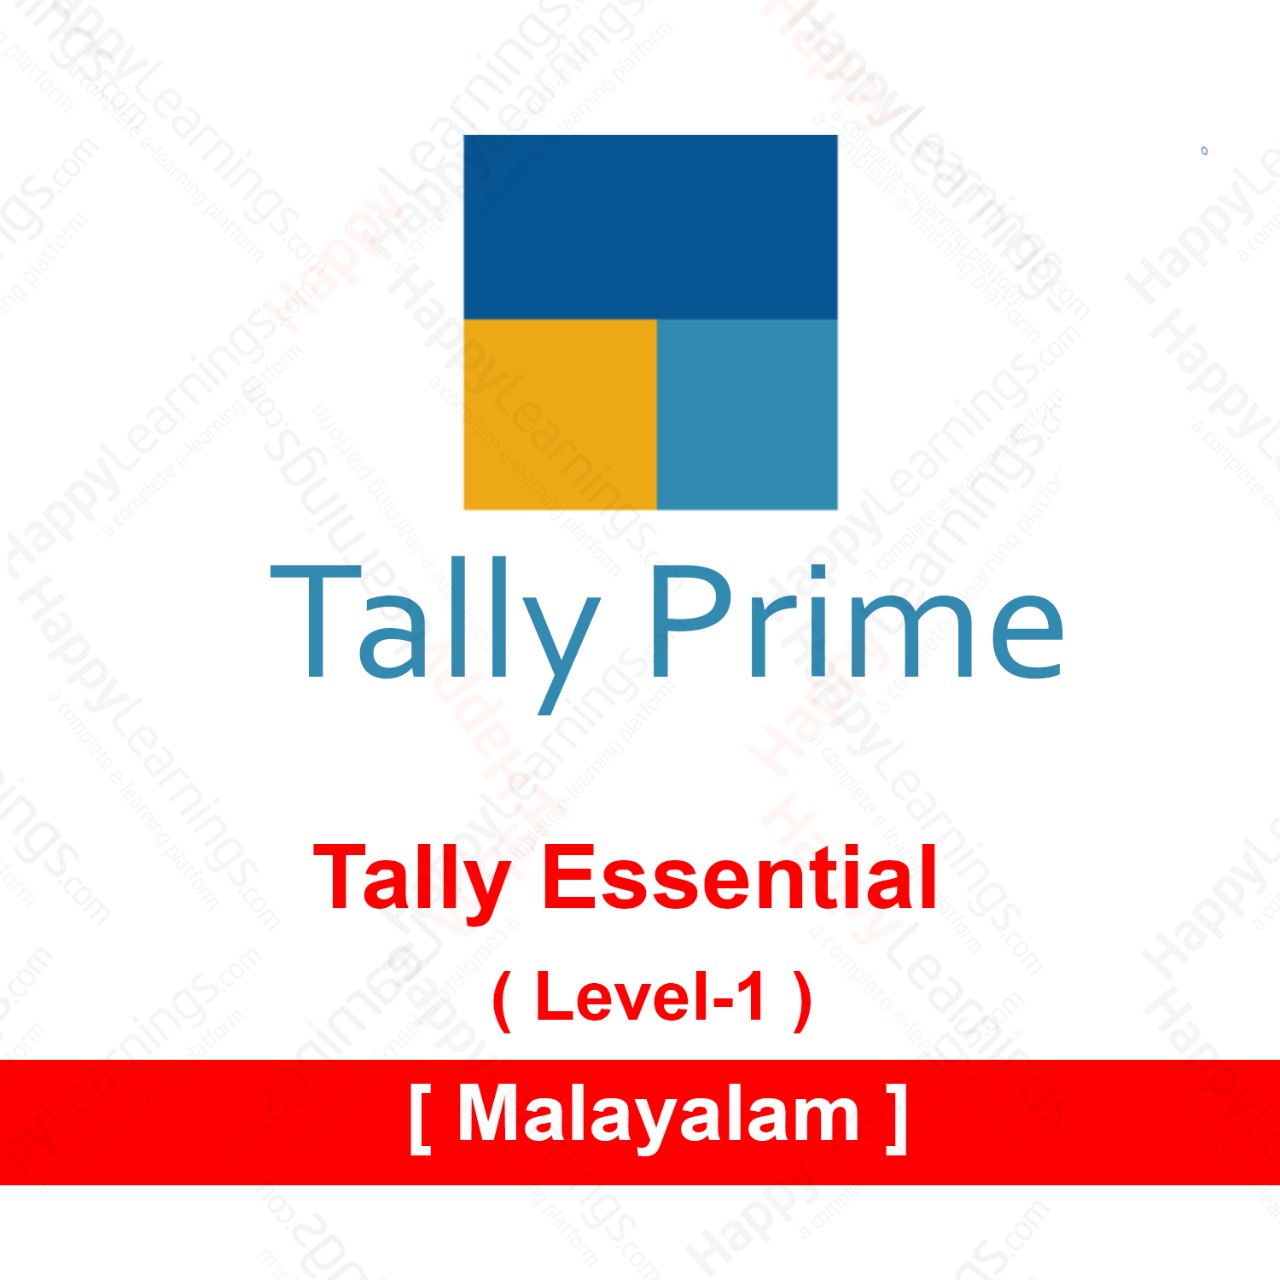 Tally Prime Essential Level -1 